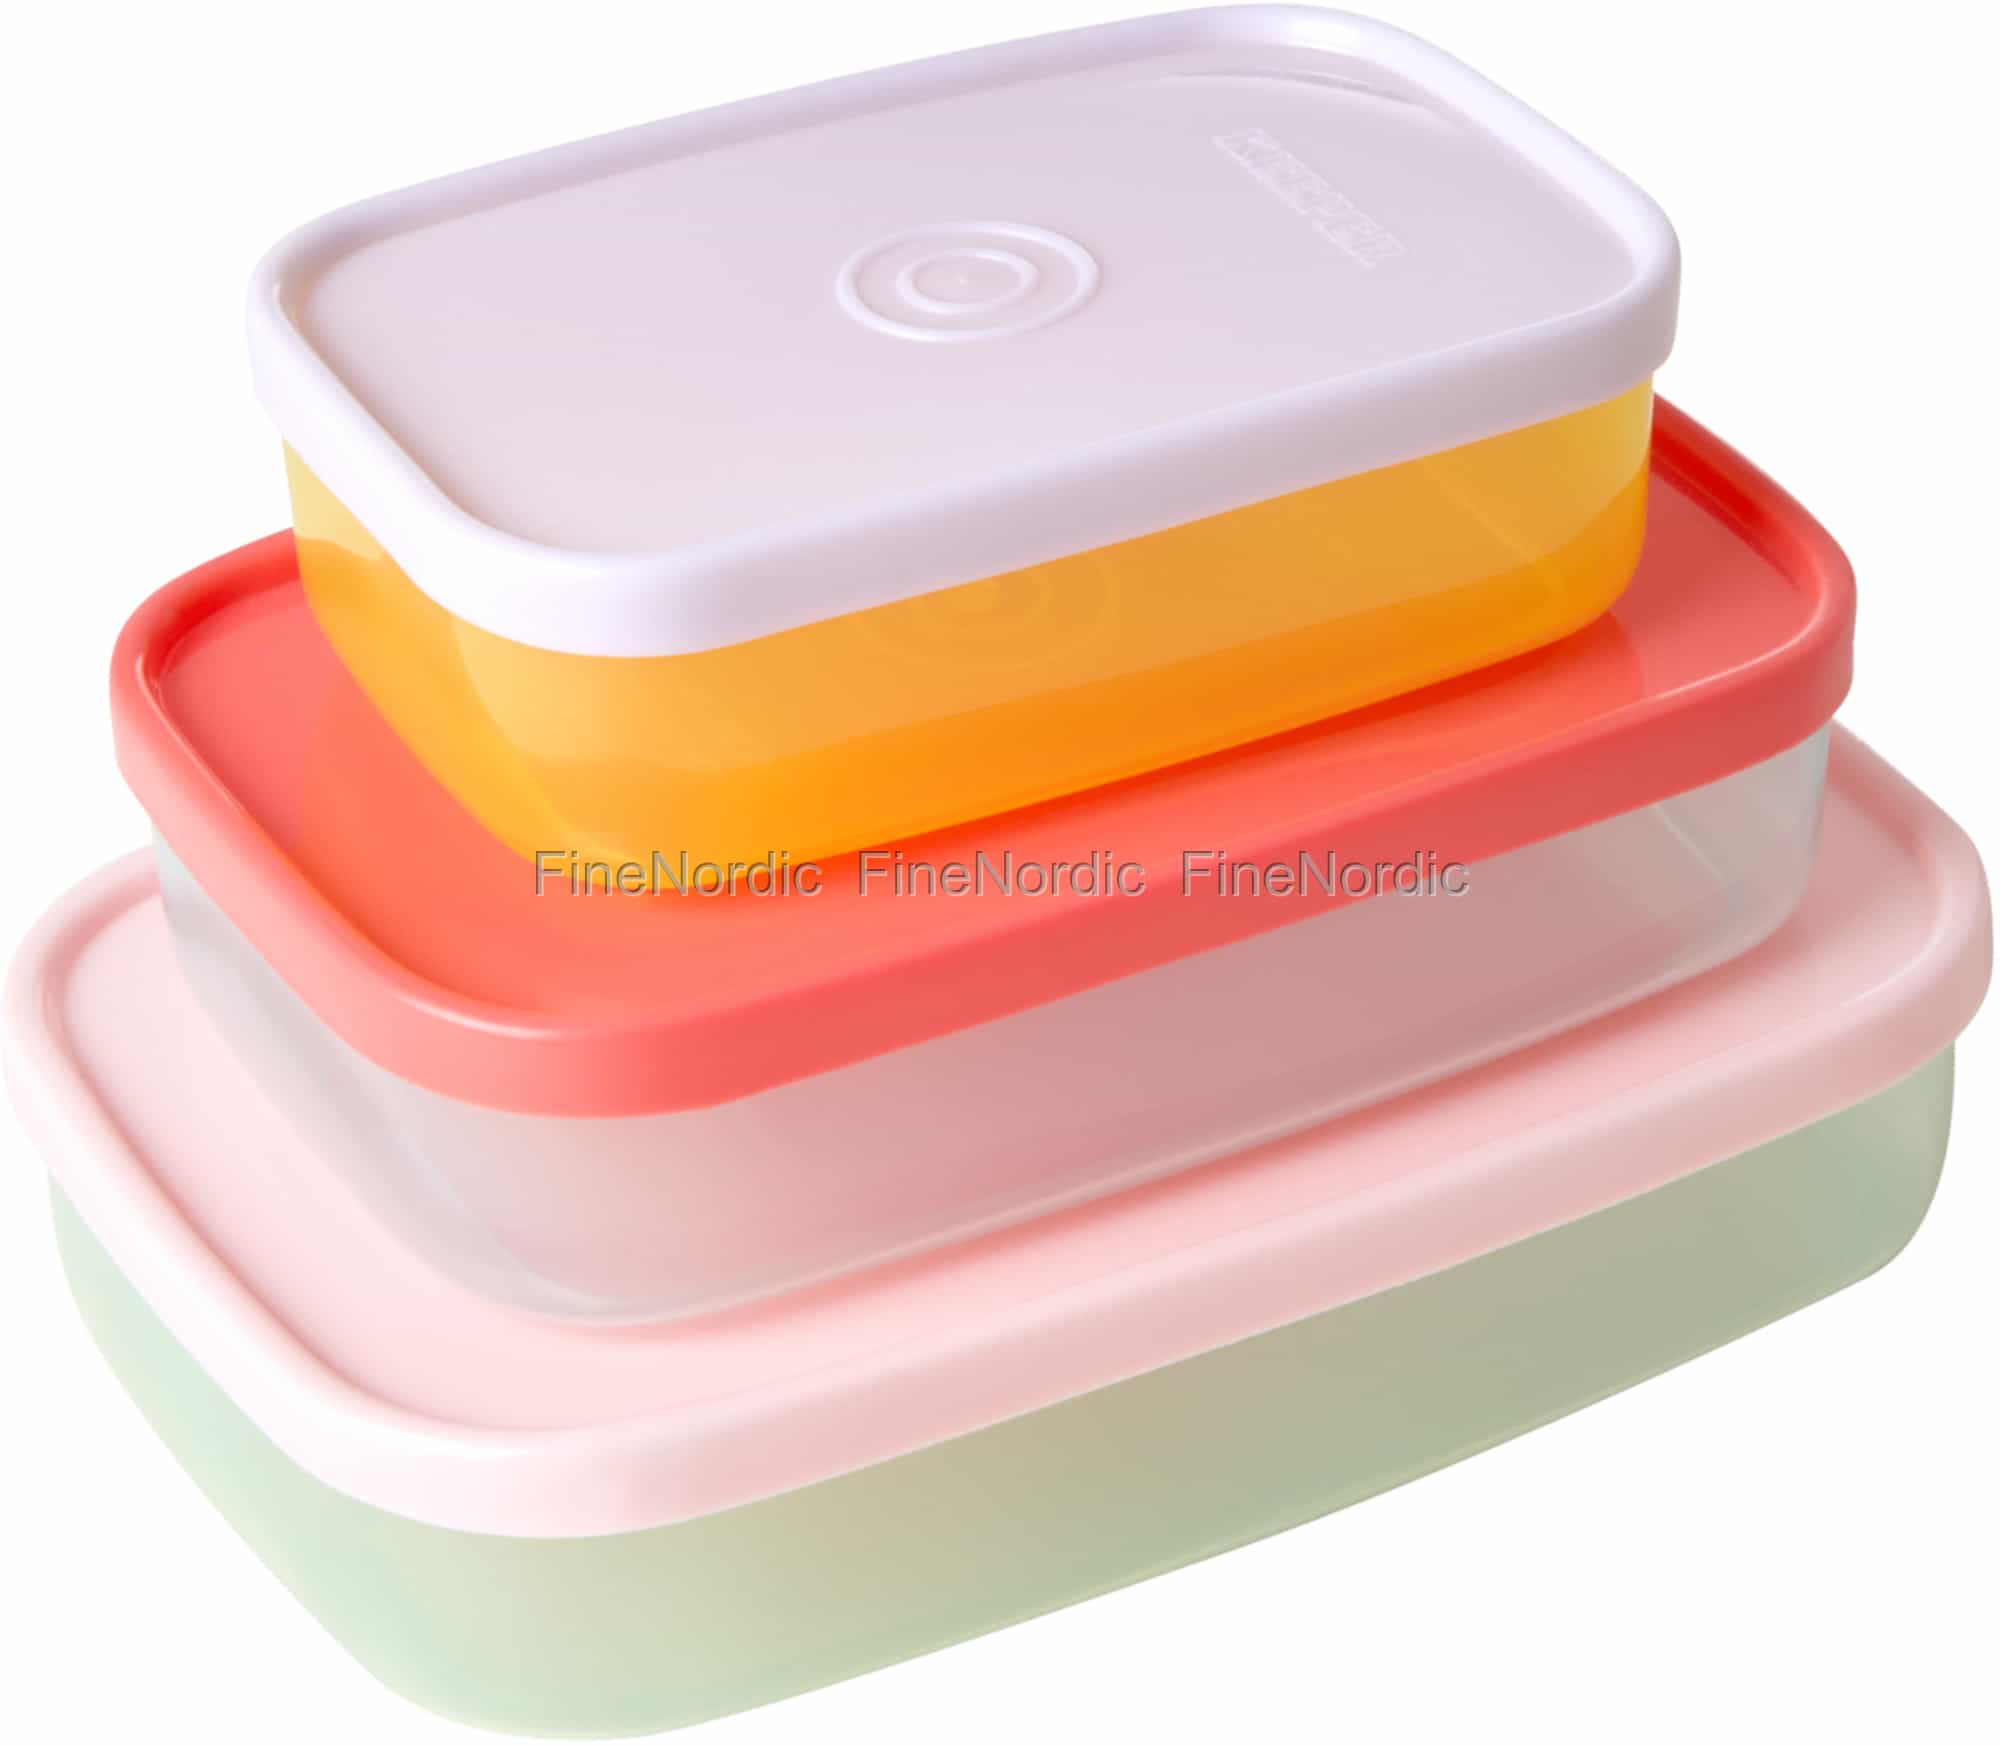 Rice Plastic Food Boxes - Rectangular - Multi Color - 3 pcs In a Net